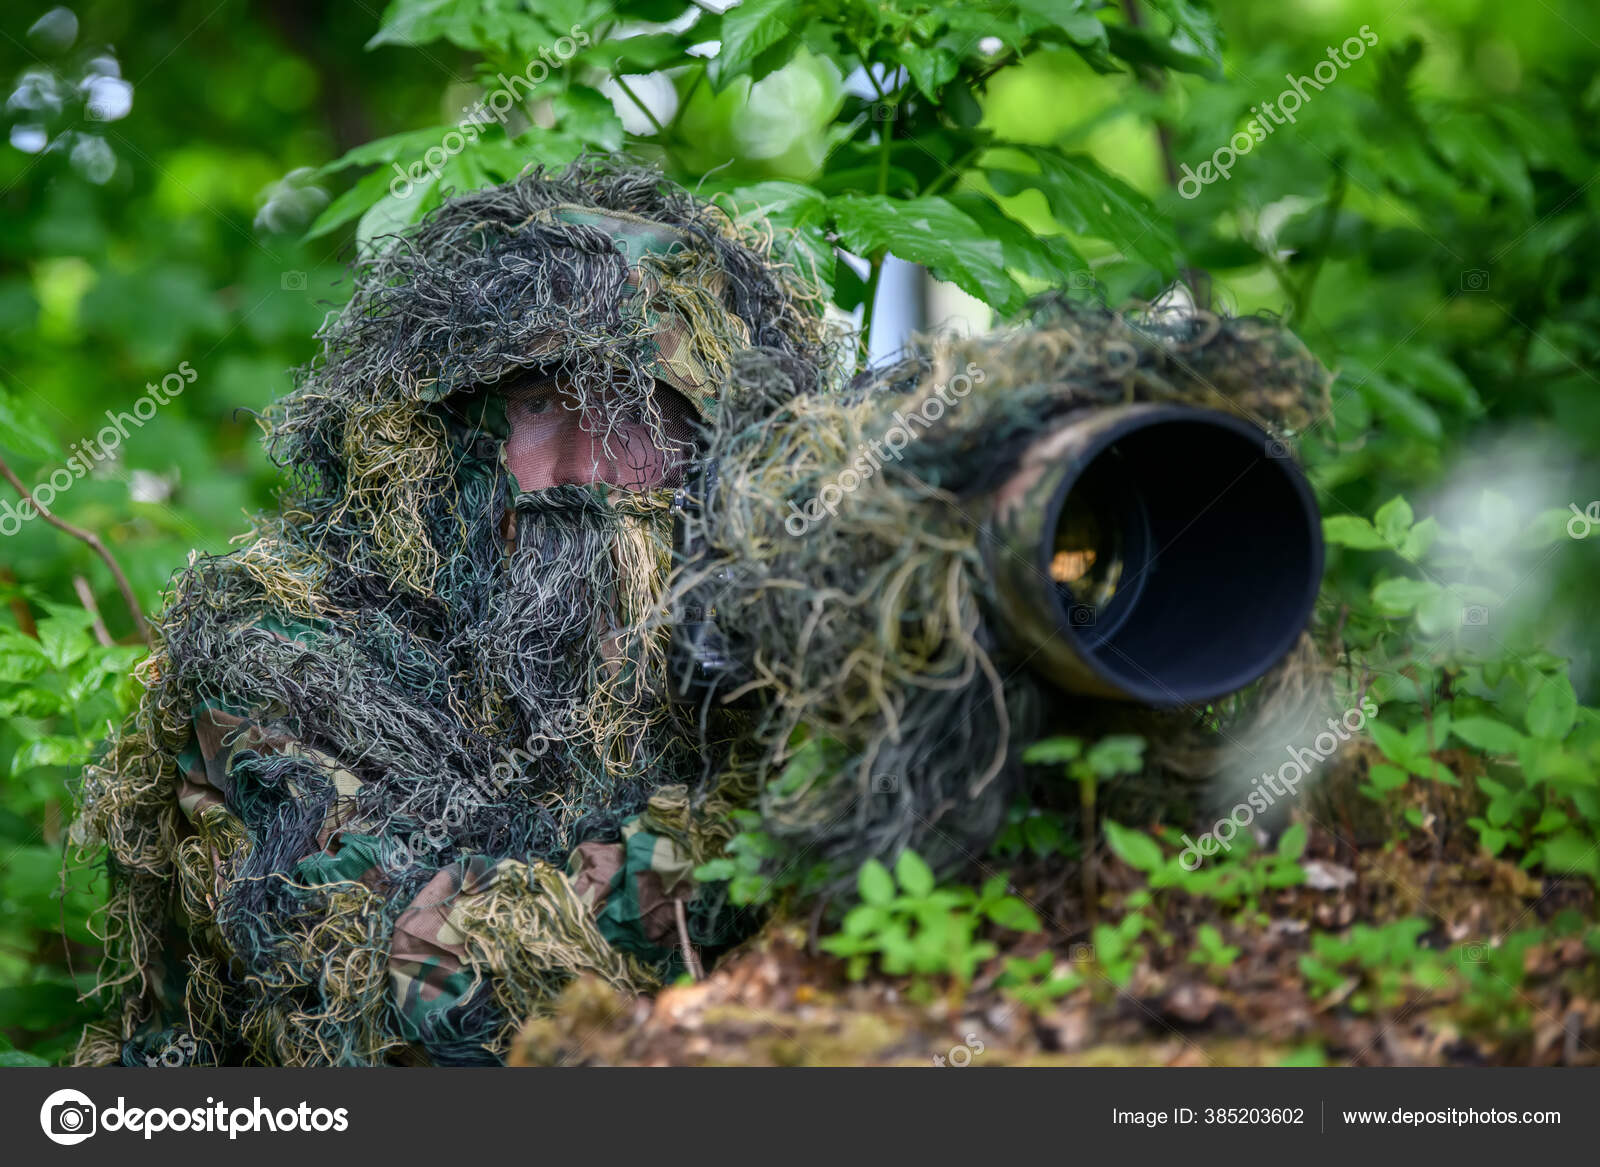 Ghillie suit - Wikipedia